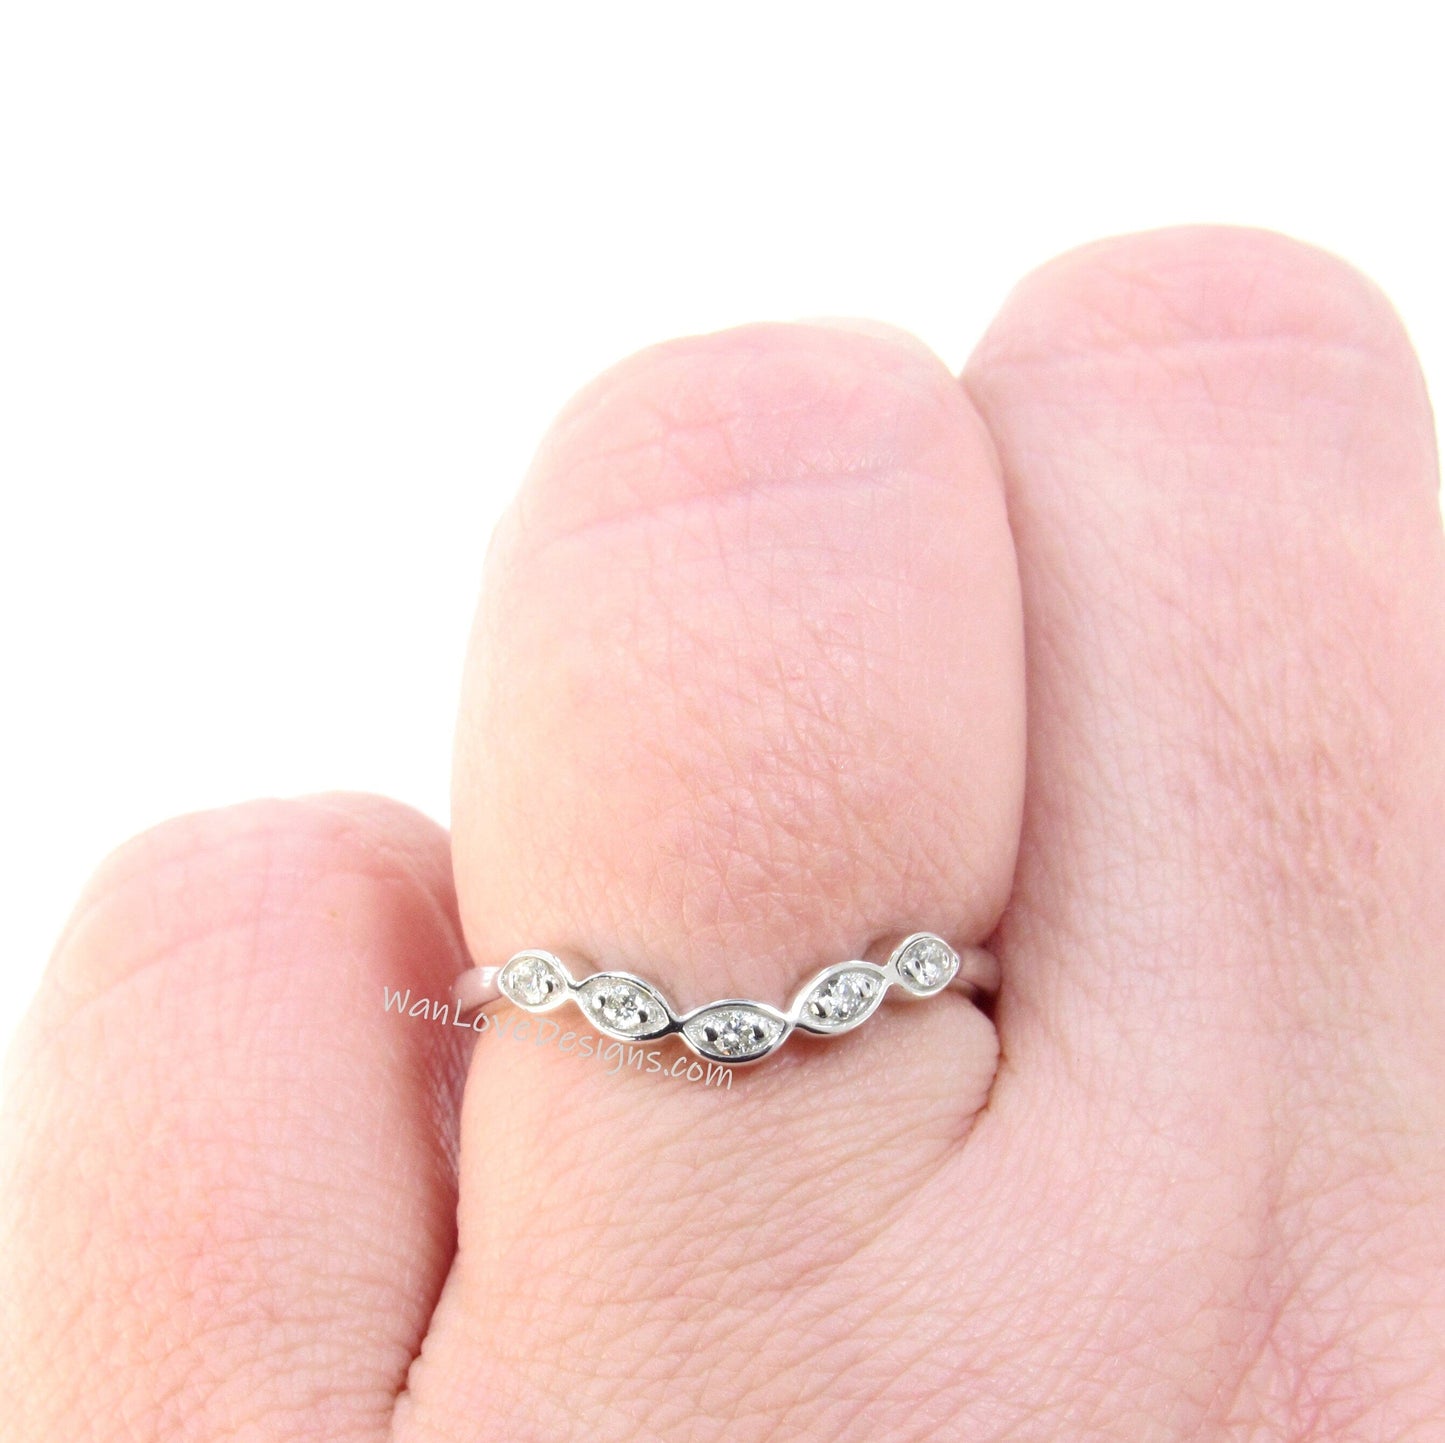 Ready to Ship White Gold Moissanite Leaves Tiara Ring Curved Nesting Band Wan Love Designs